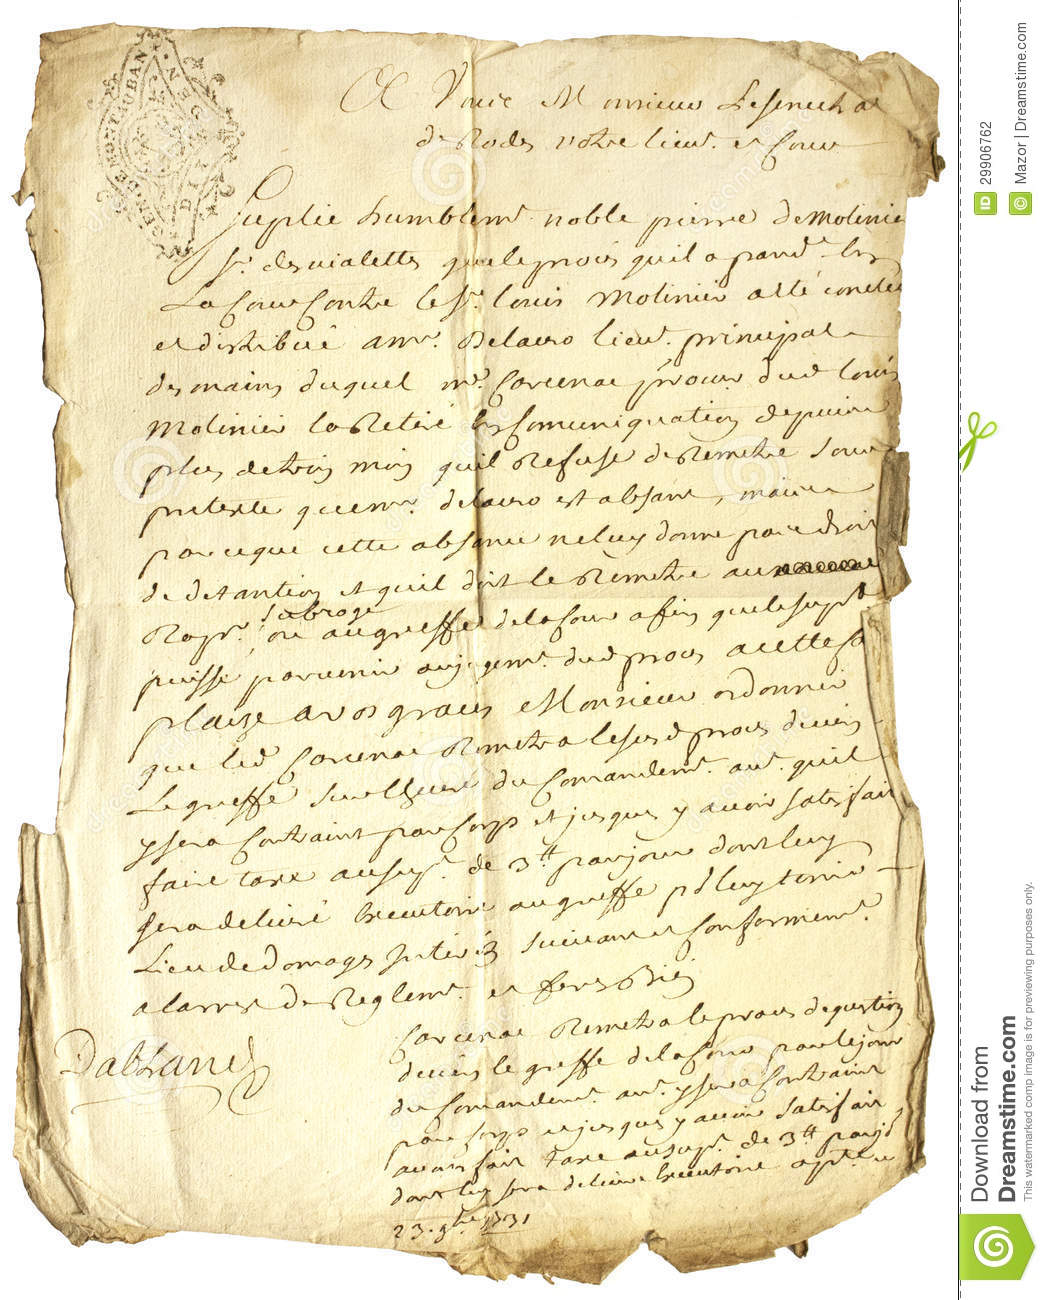 handwritten-letter-old-yellowing-paper-white-background-29906762.jpg